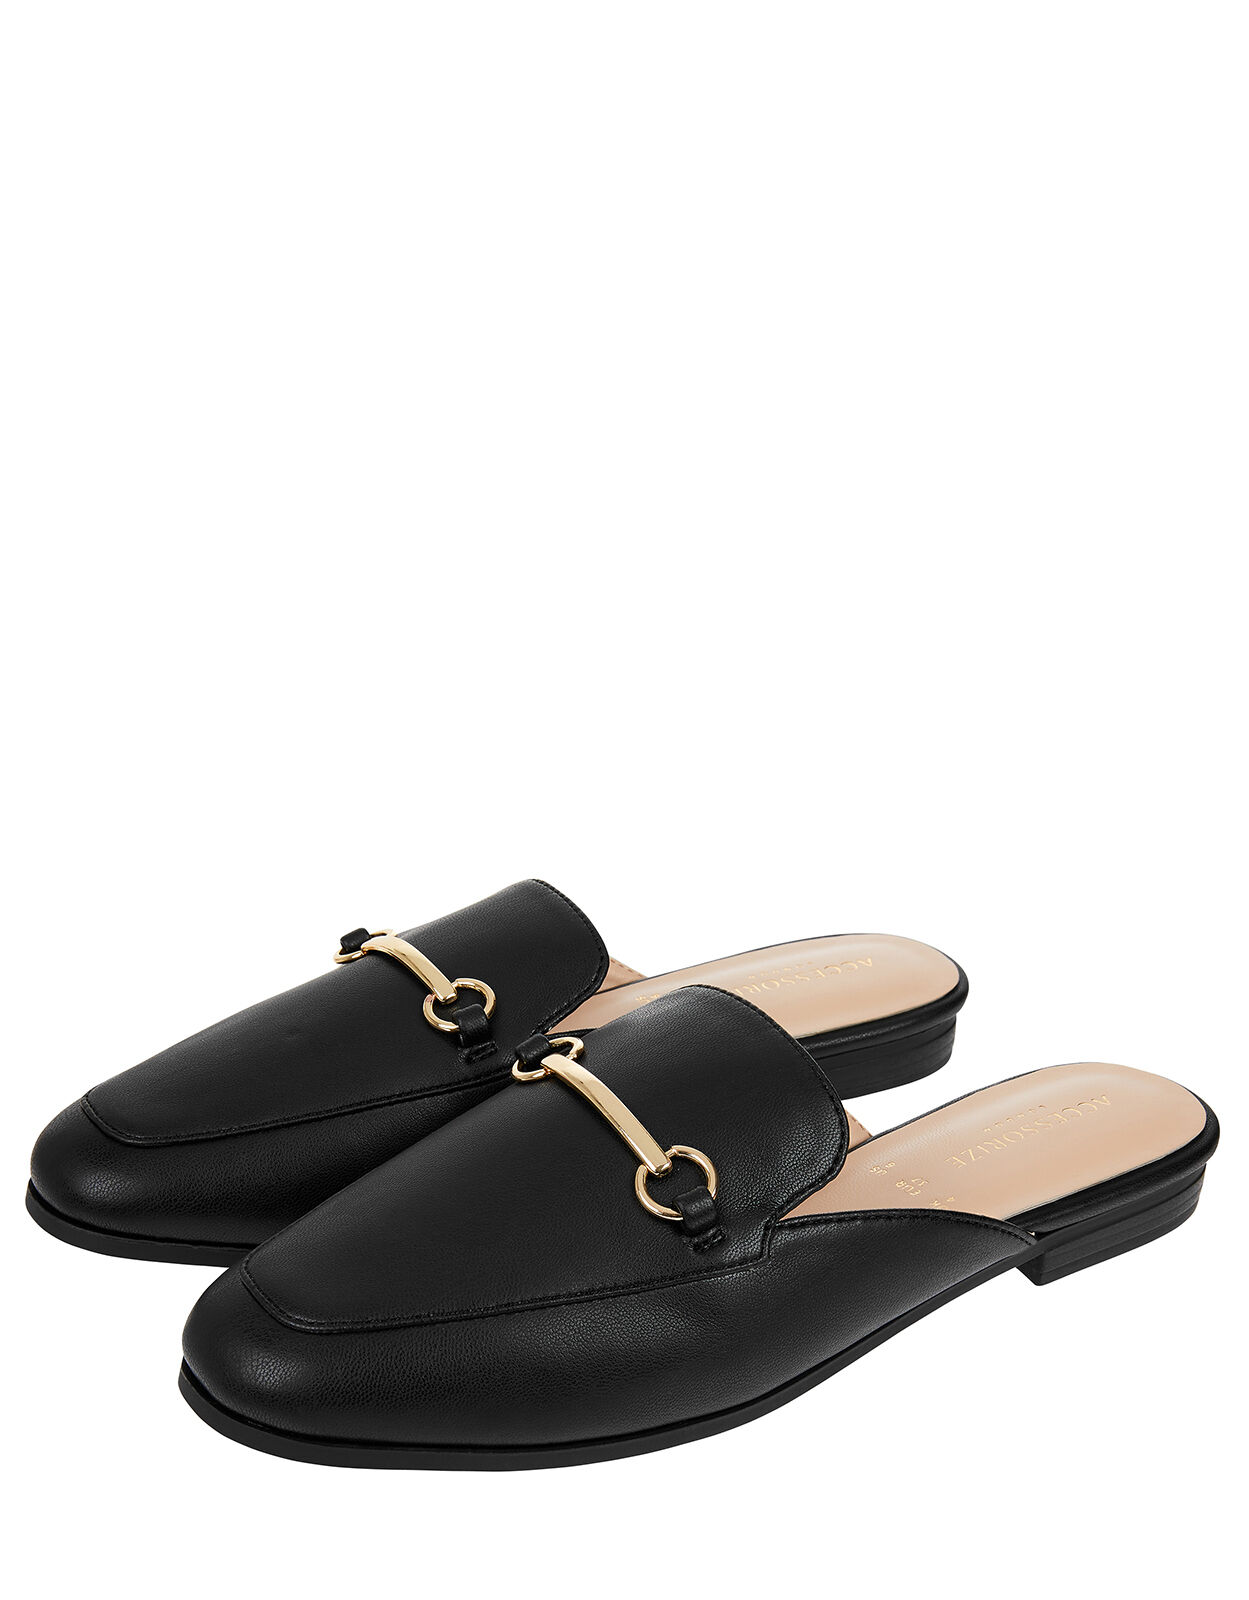 backless loafers uk